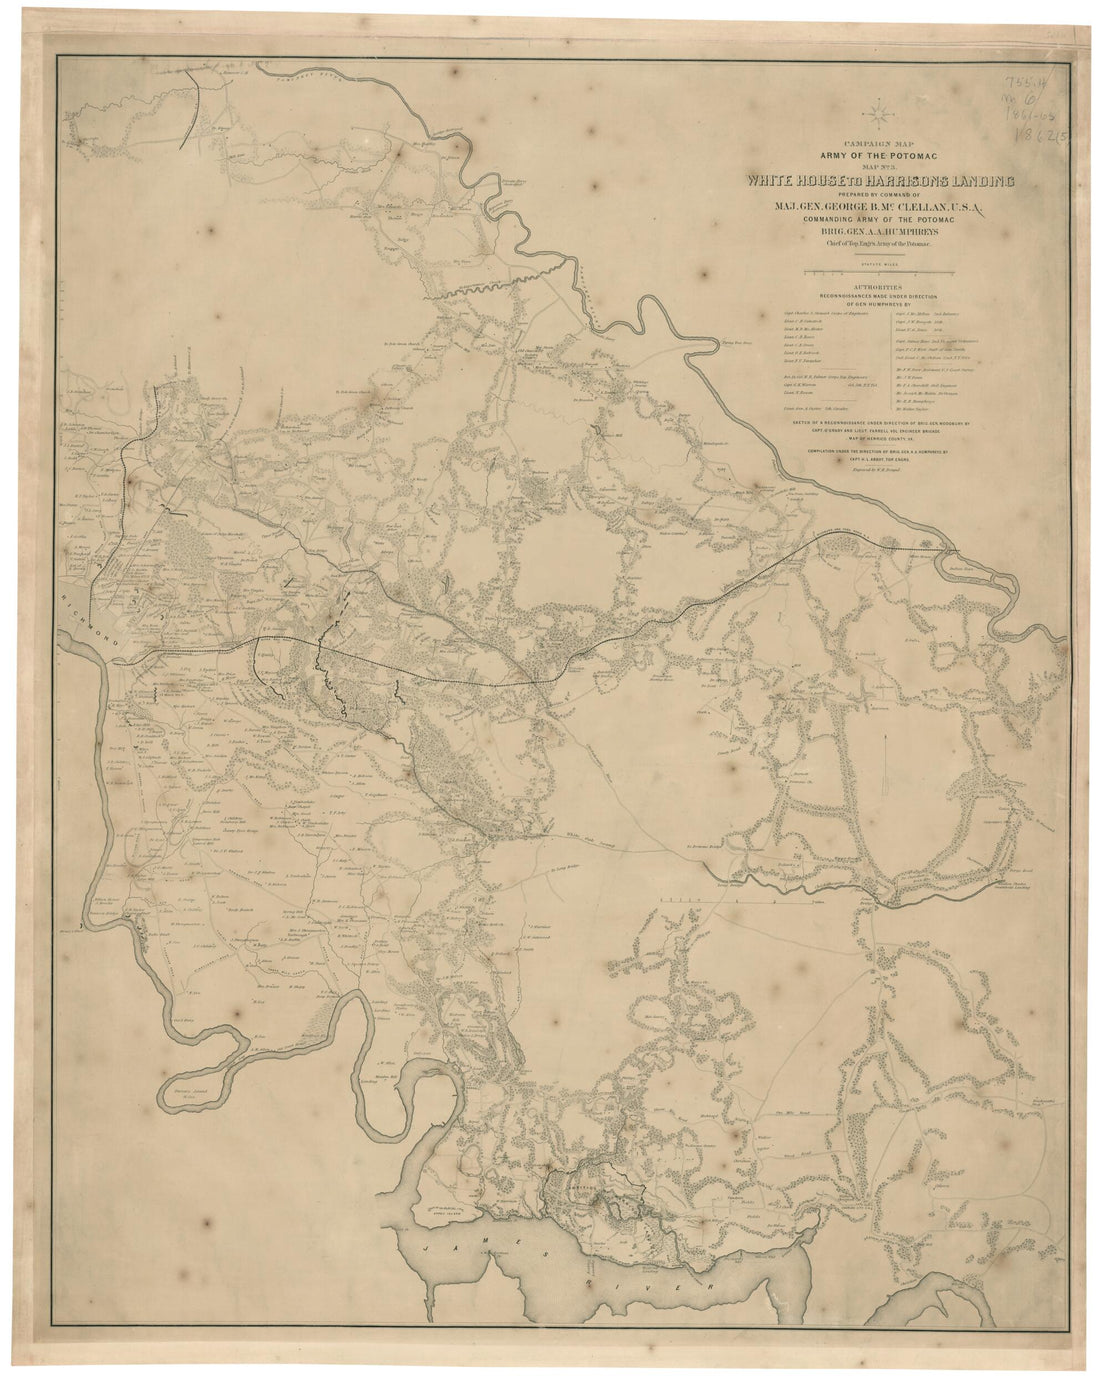 This old map of White House to Harrisons Landing (Campaign Map, Army of the Potomac, Map No 3) from 1862 was created by Henry L. Abbot, William H. Dougal,  United States. Army of the Potomac. Engineer Dept in 1862